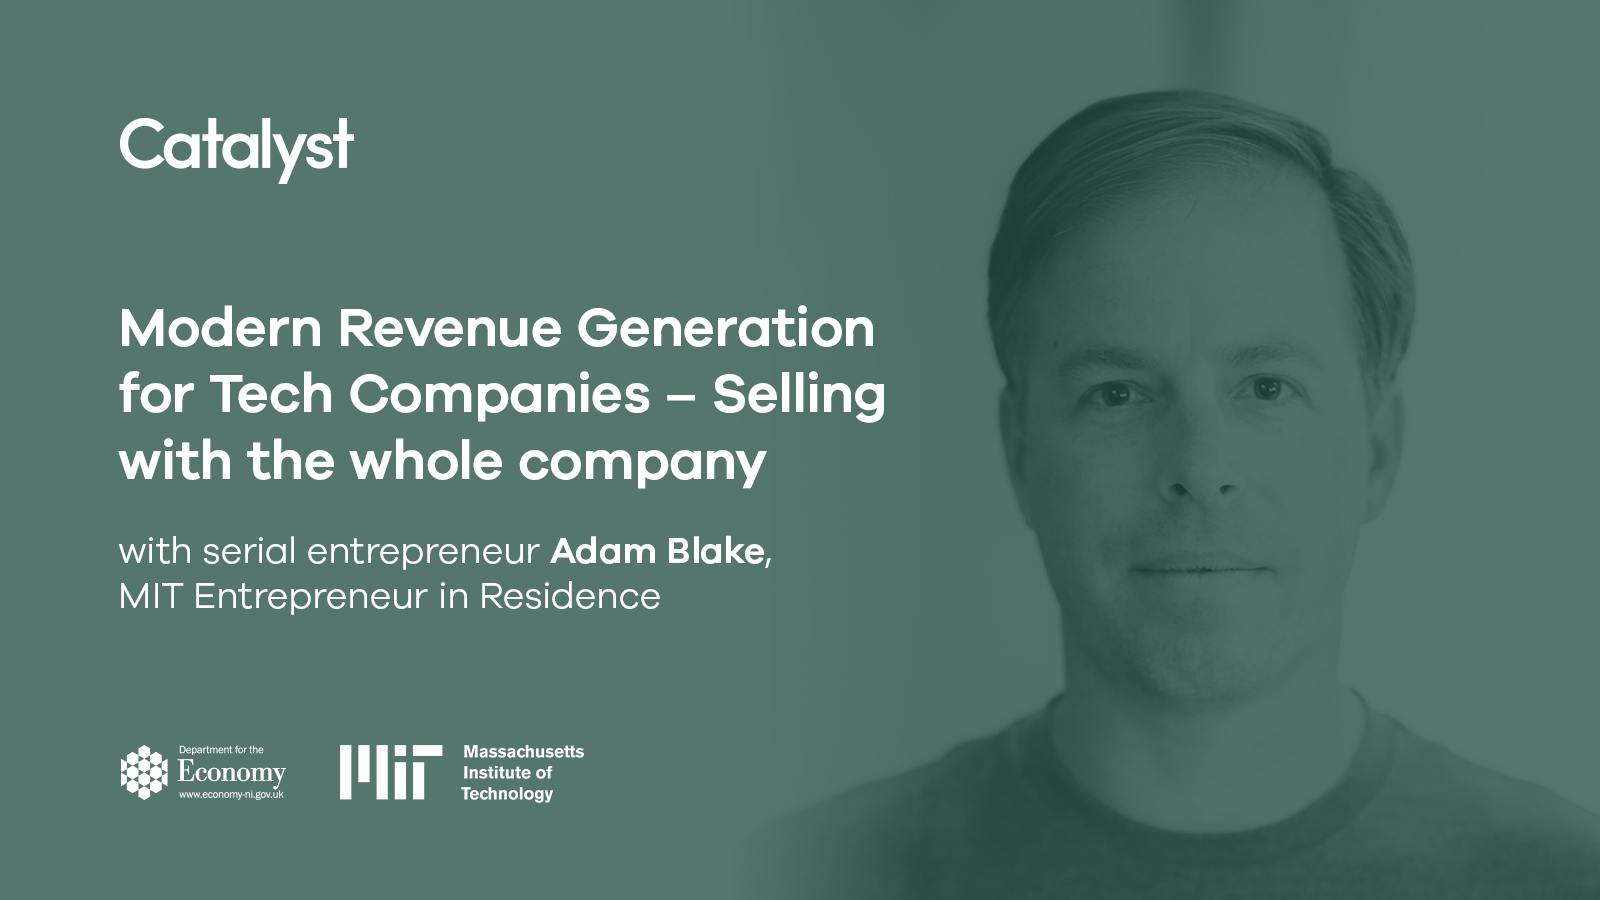 Modern Revenue Generation – Selling with the whole company